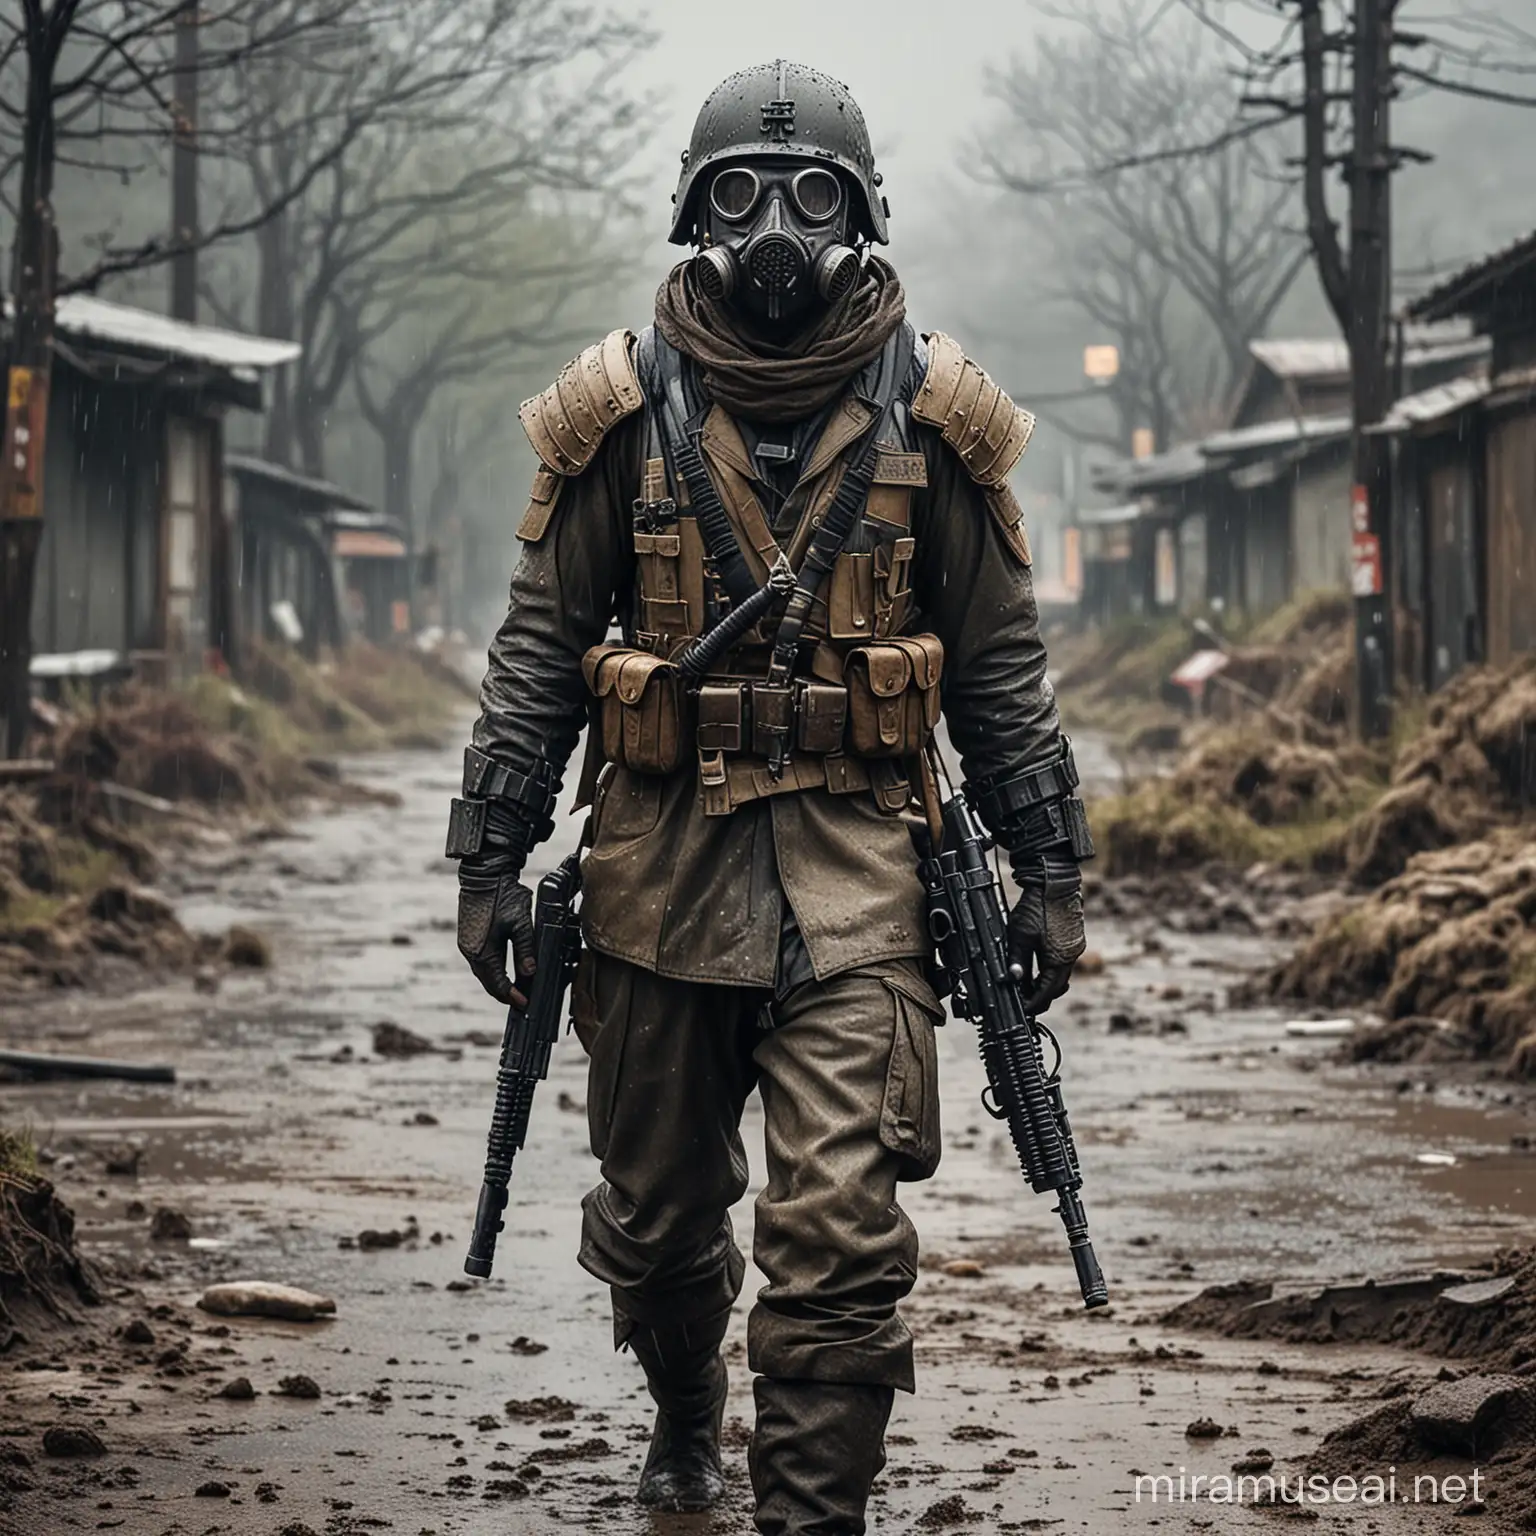 Japanese Soldier in PostApocalyptic Setting with Mud and Rain Detailed Armor Gas Mask Helmet and Weaponry